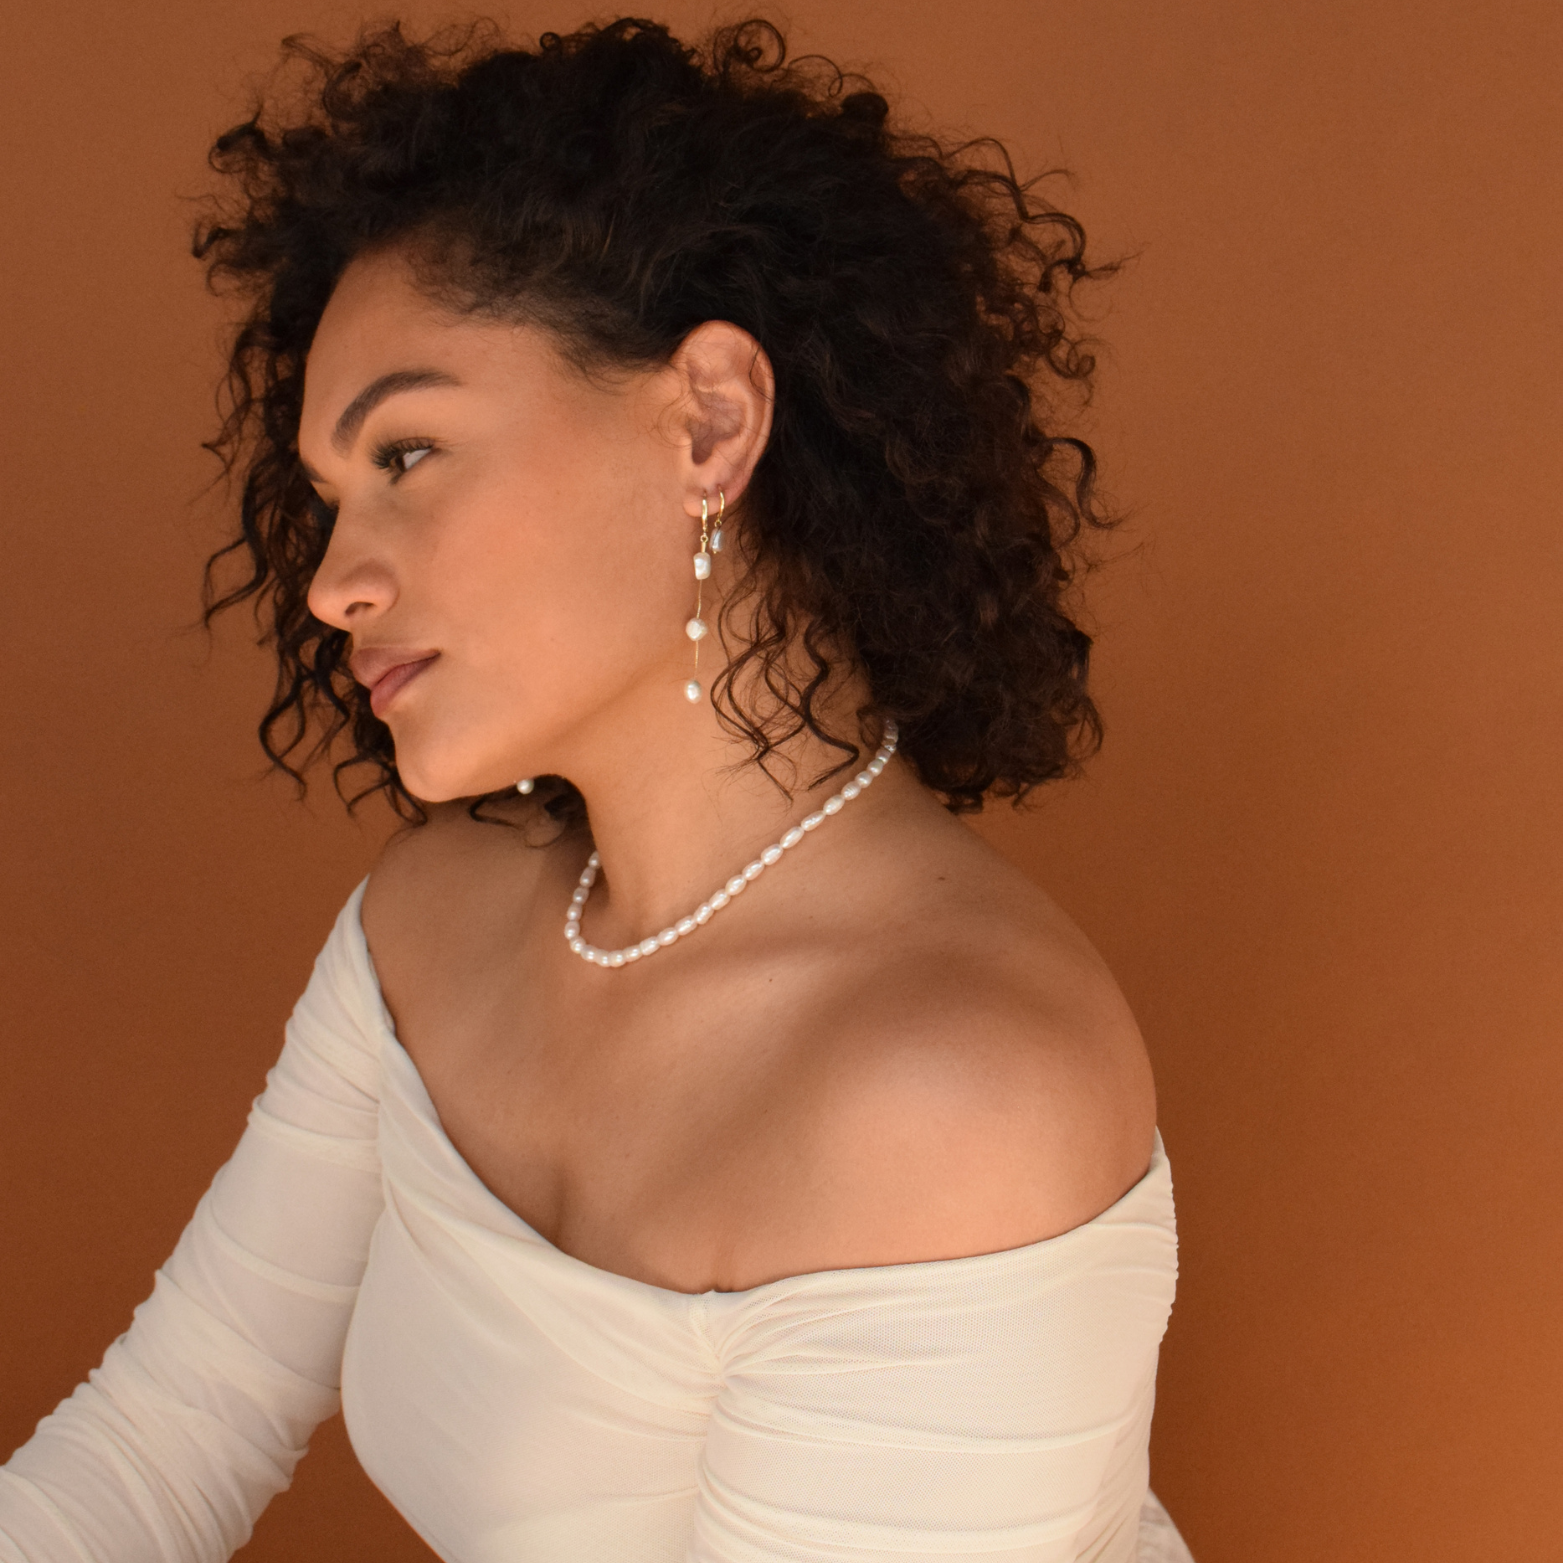 Woman with curly hair showcasing the Baroque Hoops - 14K Gold Plated with a coordinating white outfit